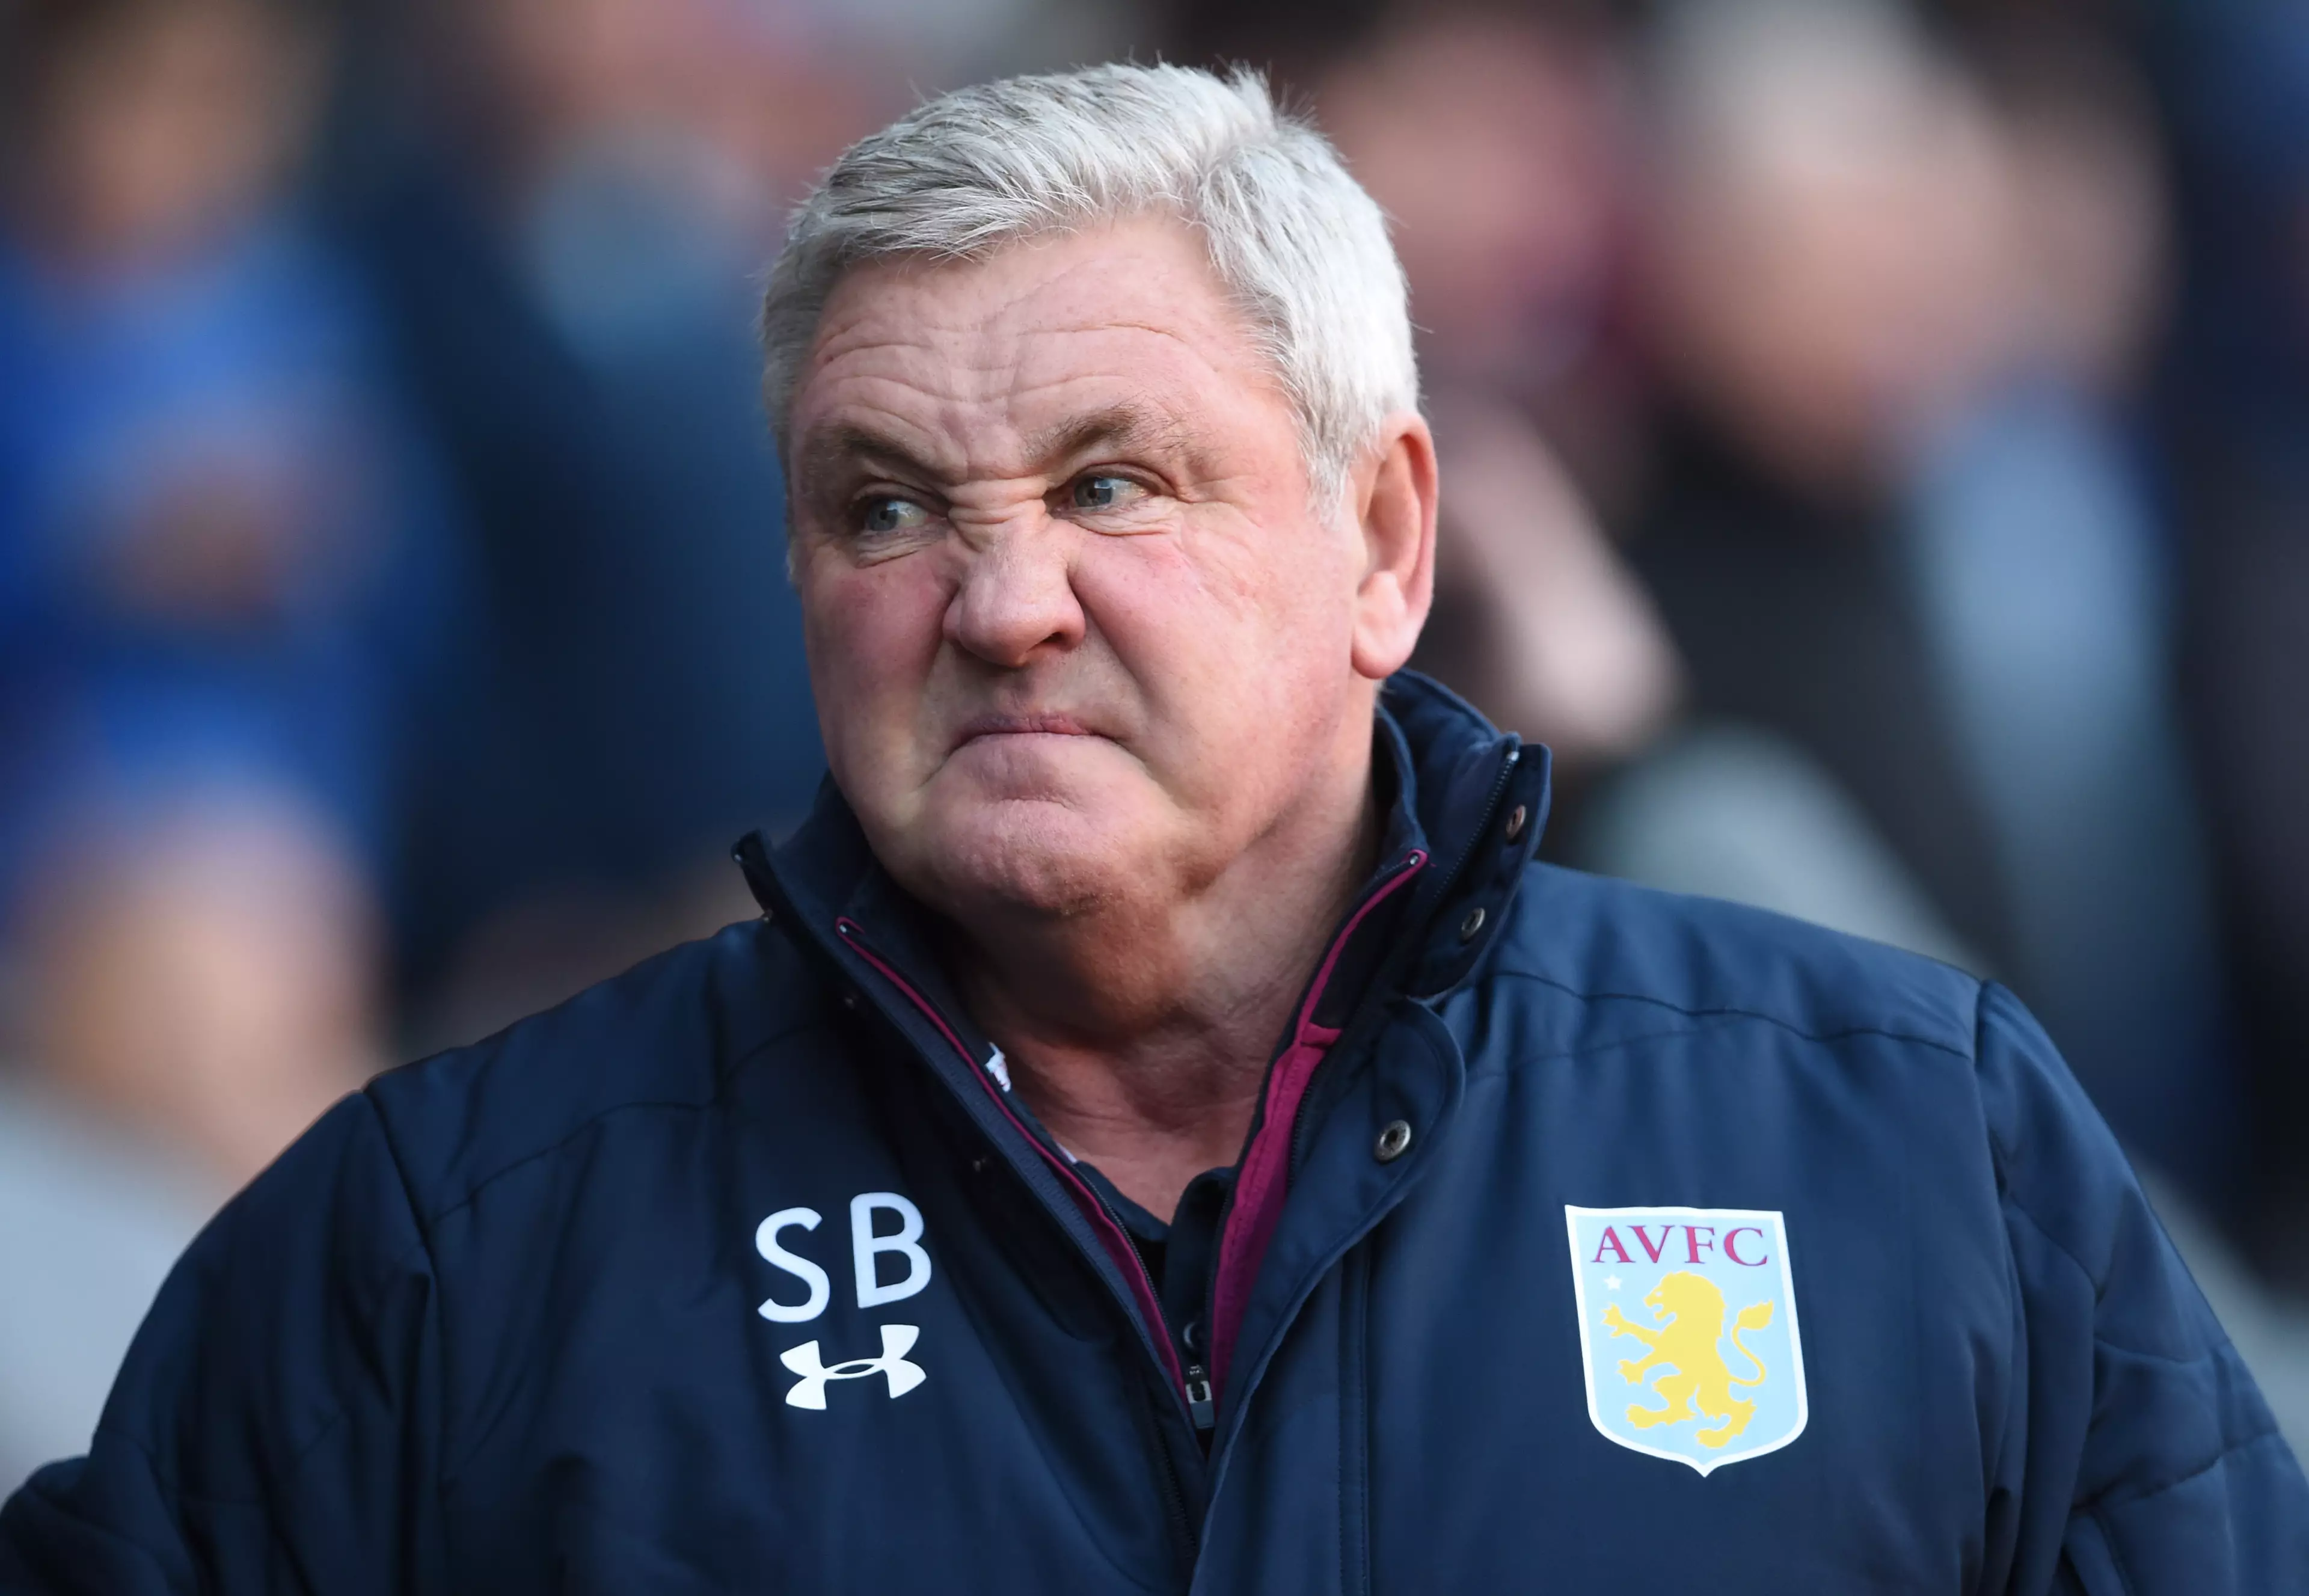 Championship Side Aston Villa Have One Of The Highest Wage Bill In Europe